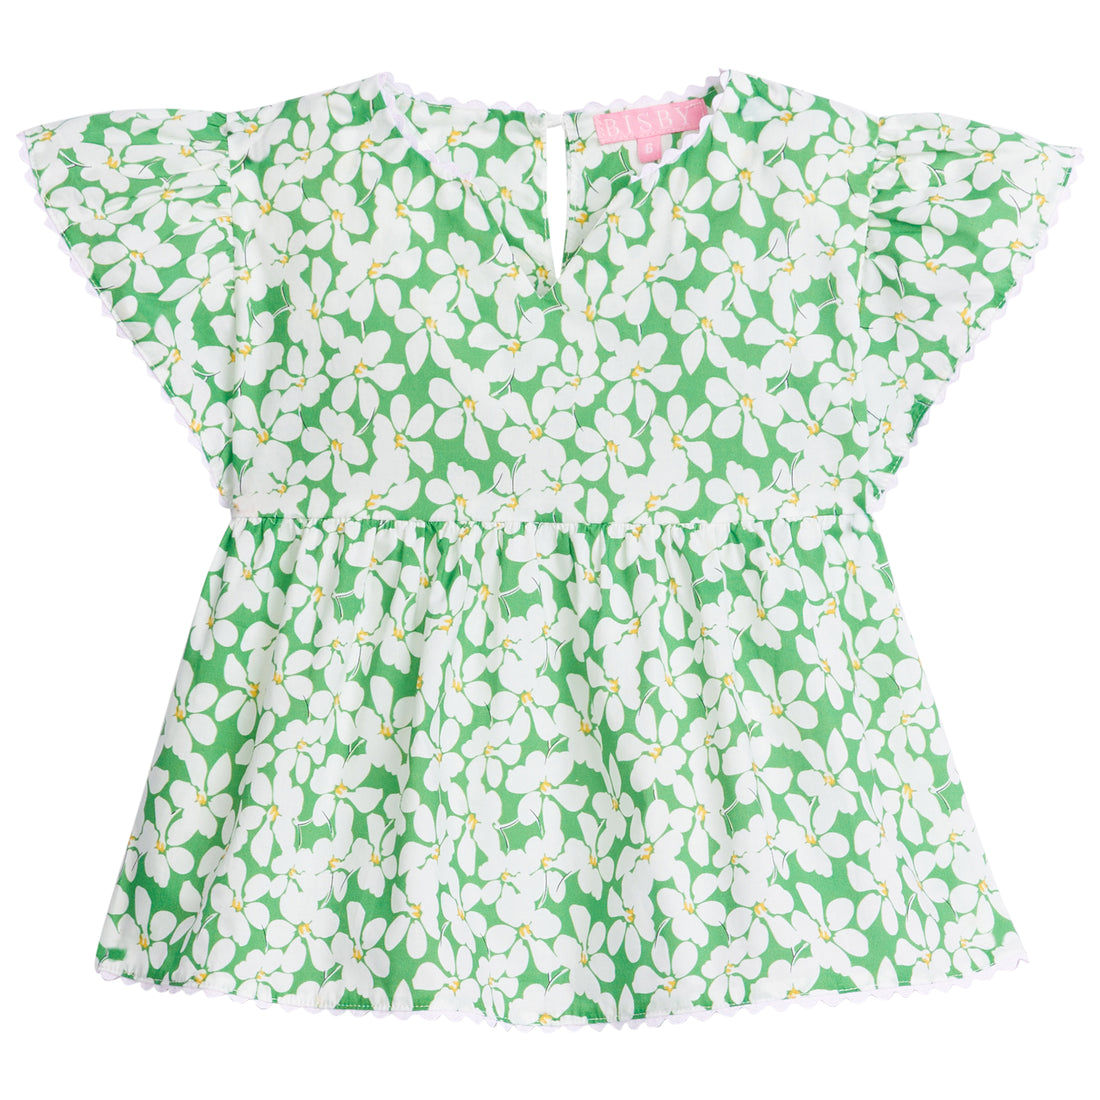 Girl/tween v-neck top with white scallop trim on sleeve and bottom of top. Has a green background with white flowers with yellow centers printed on top.